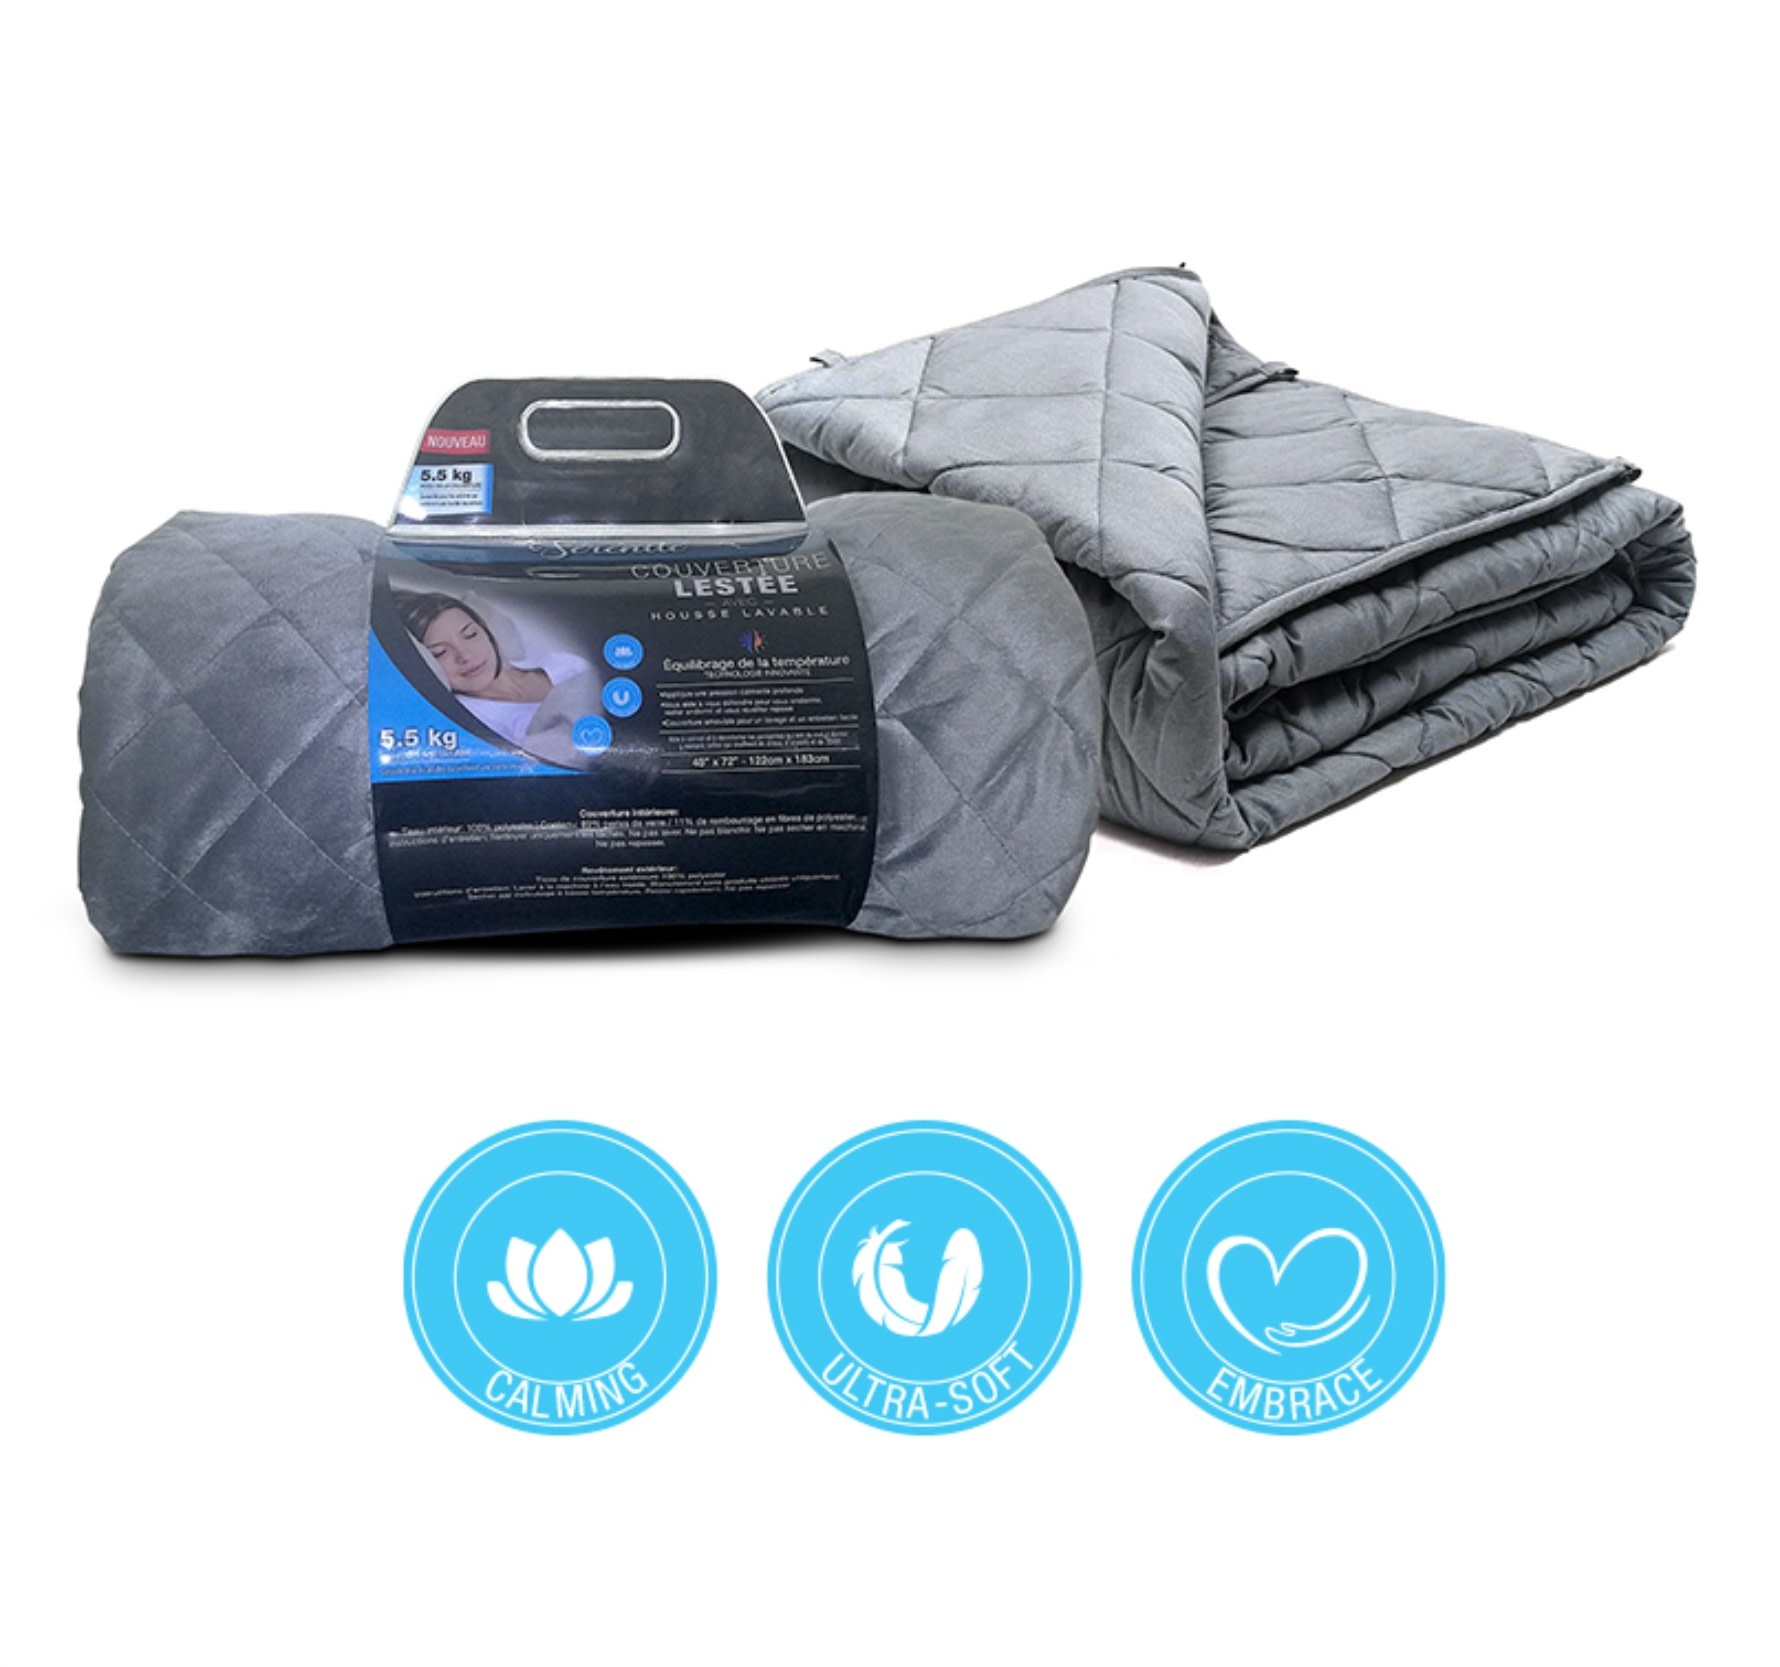 15lb WEIGHTED BLANKET GREY 60X80" (MP2) - Oxford Mills Home Fashion